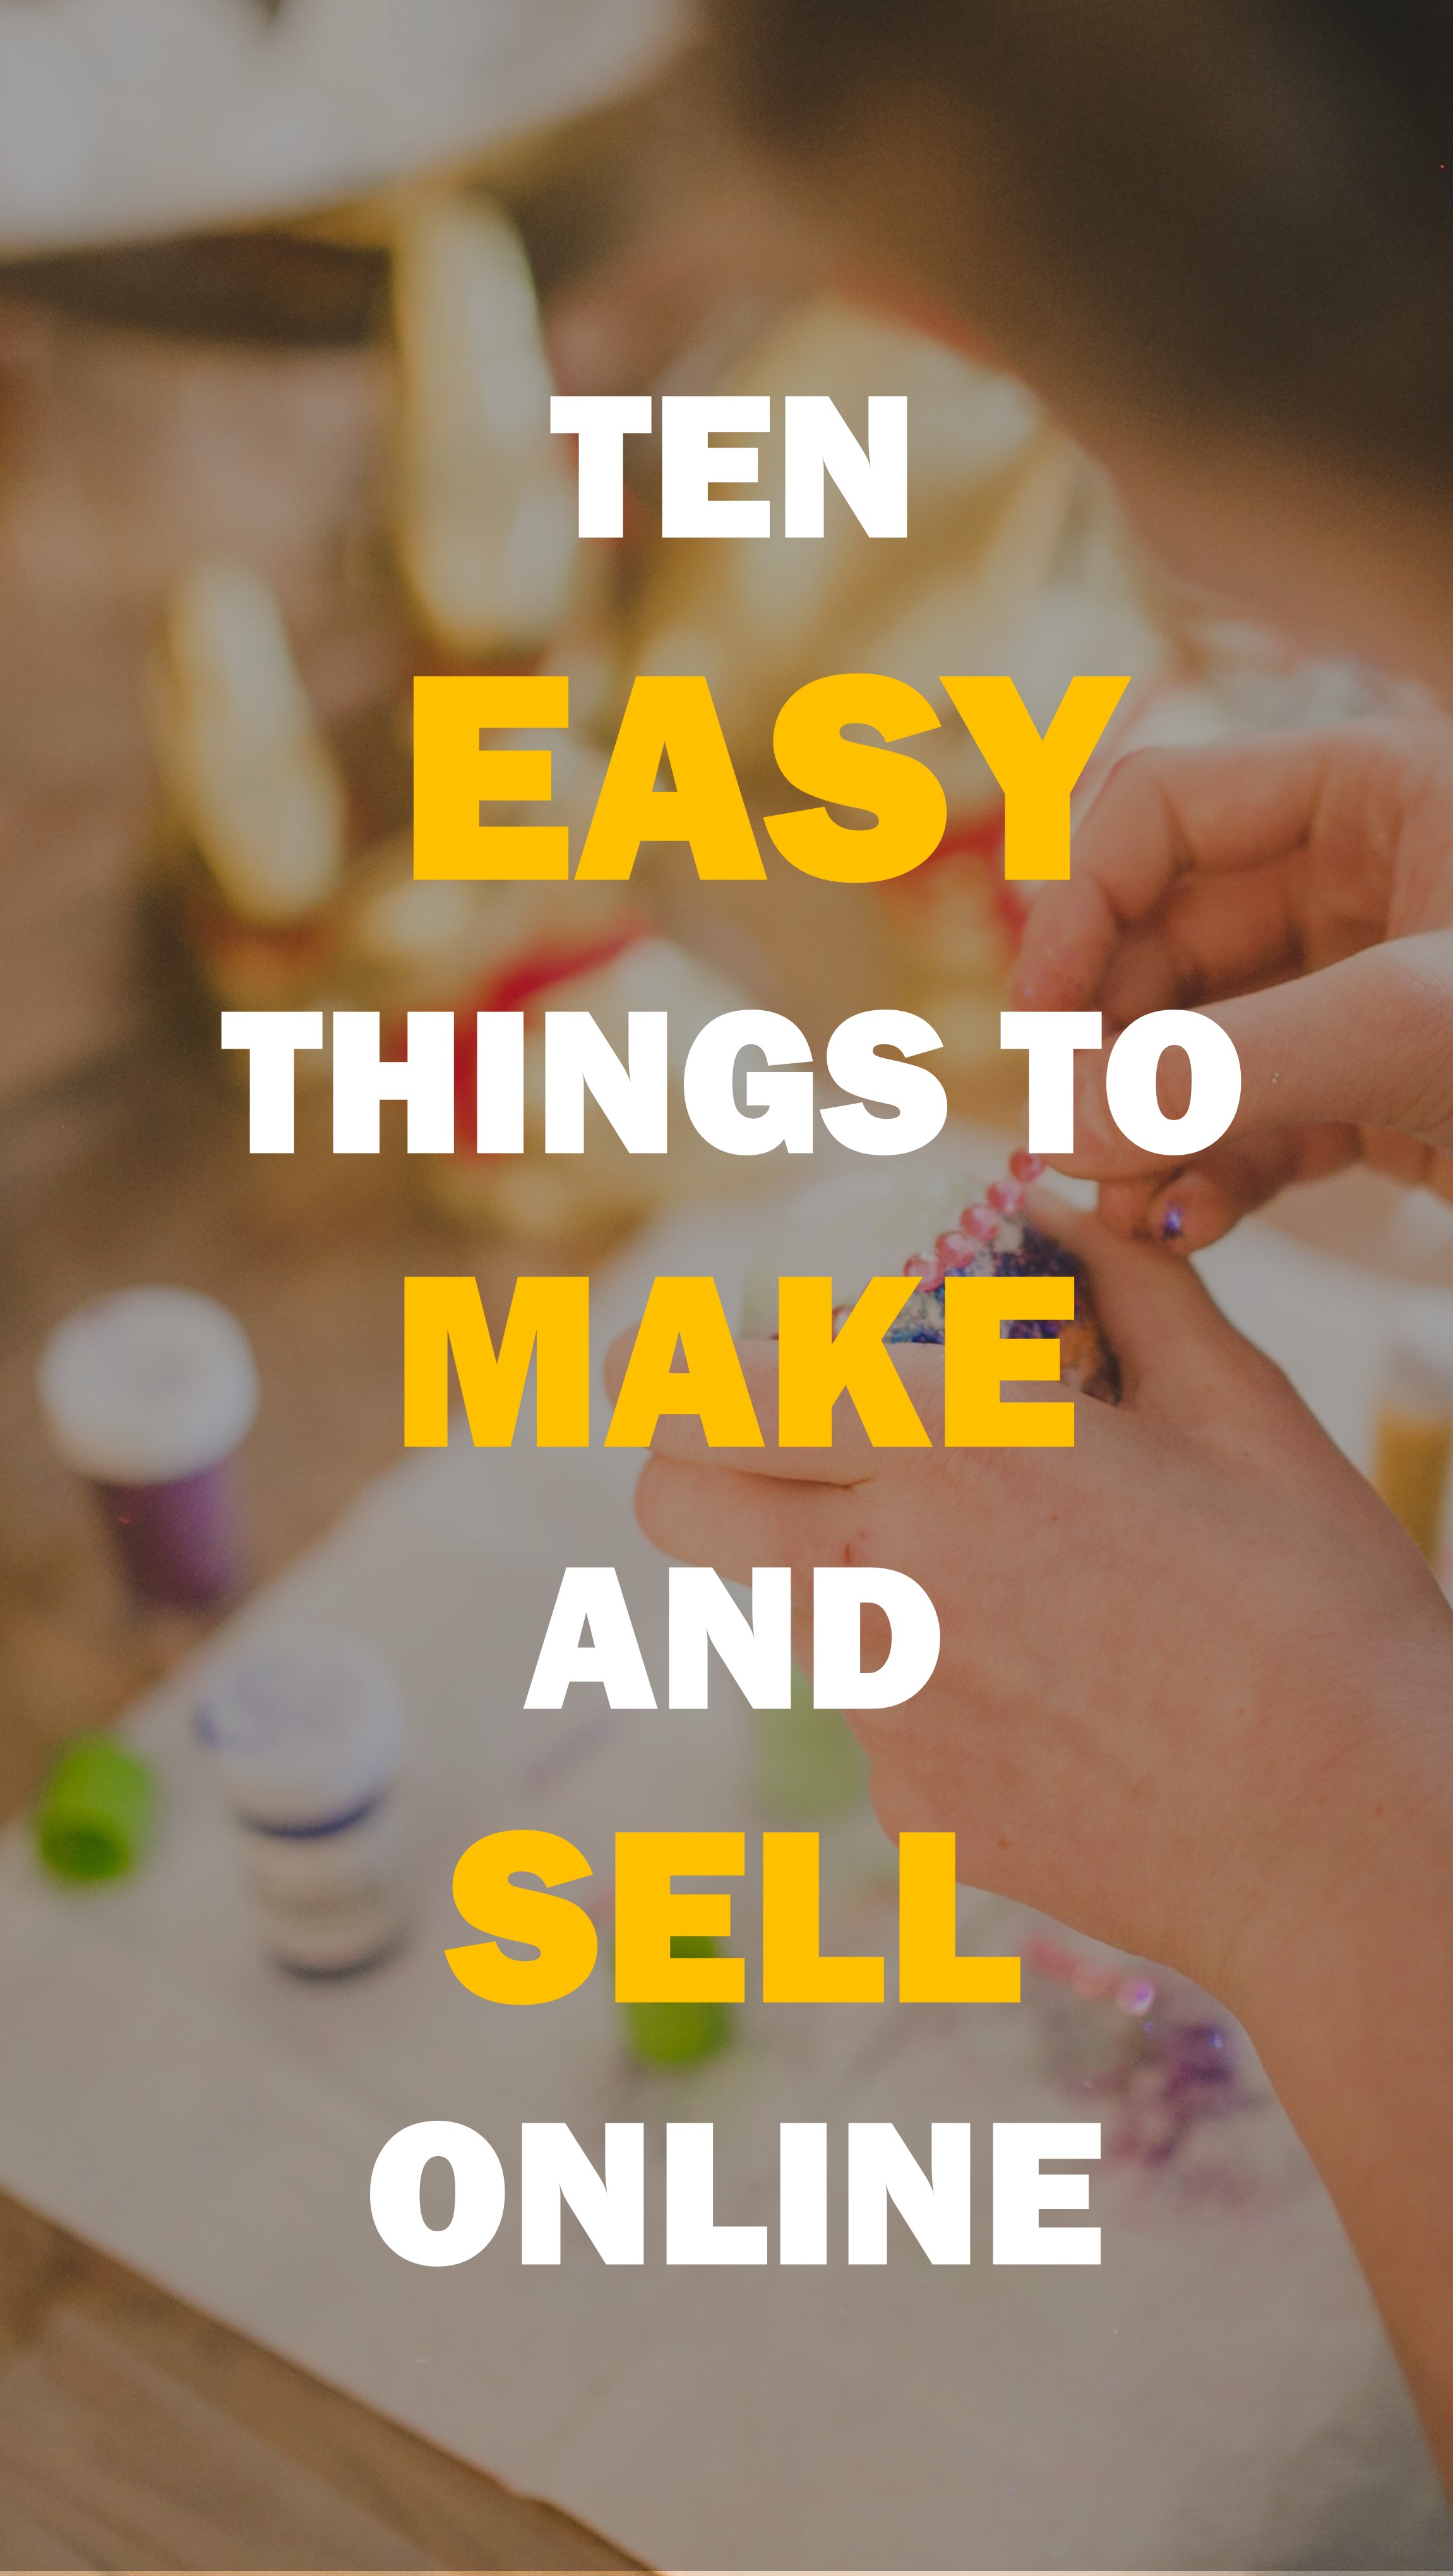 10 easy things to make and sell - indieCart Blog